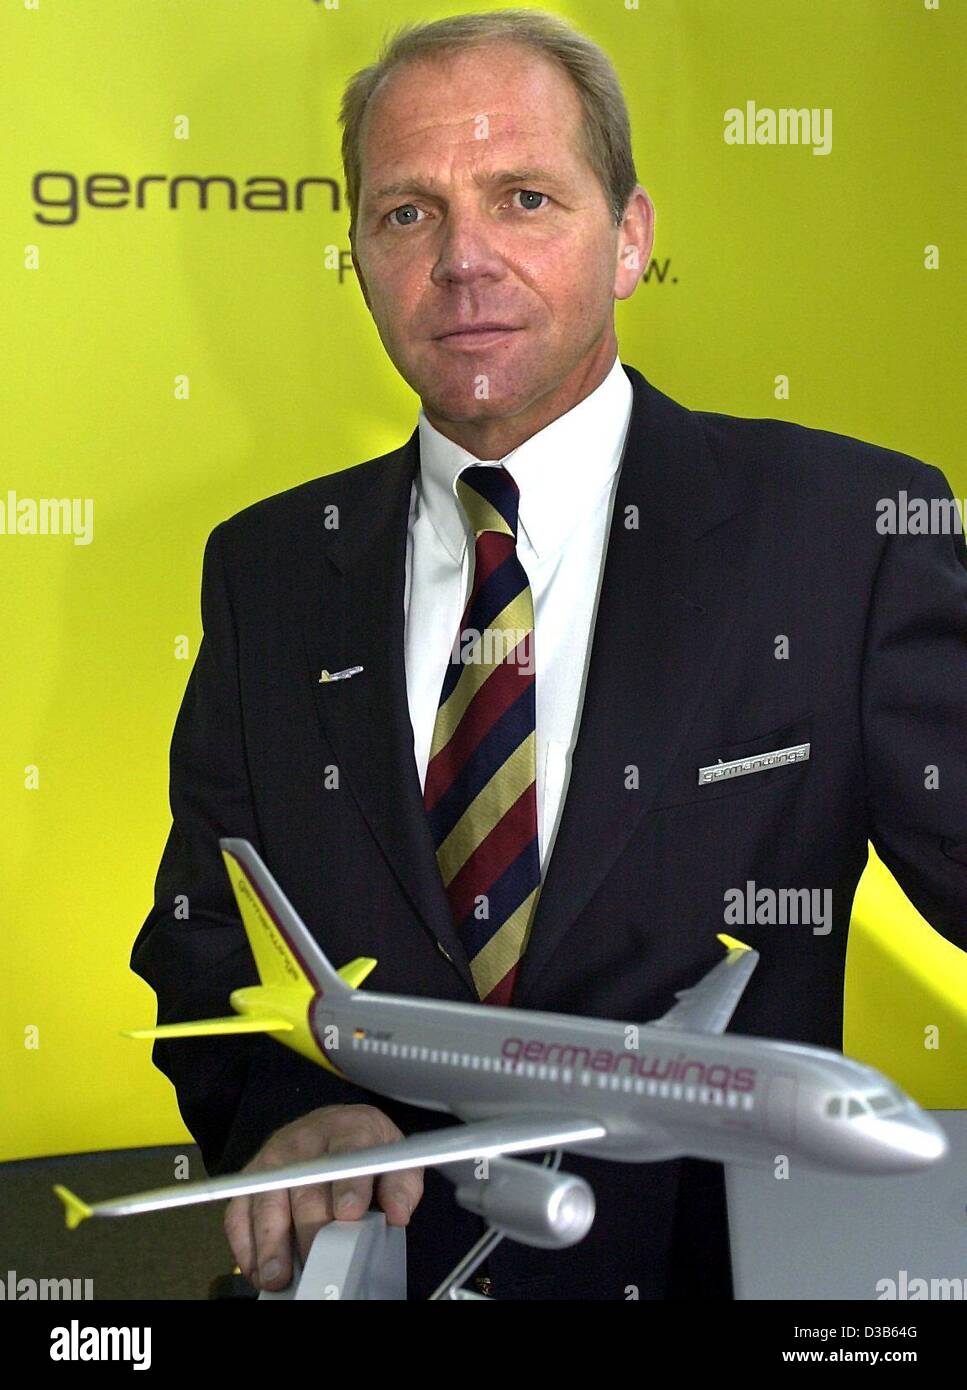 (dpa) - Friedrich-Wilhelm Weitholz, Chairman of Eurowings, poses behind ...